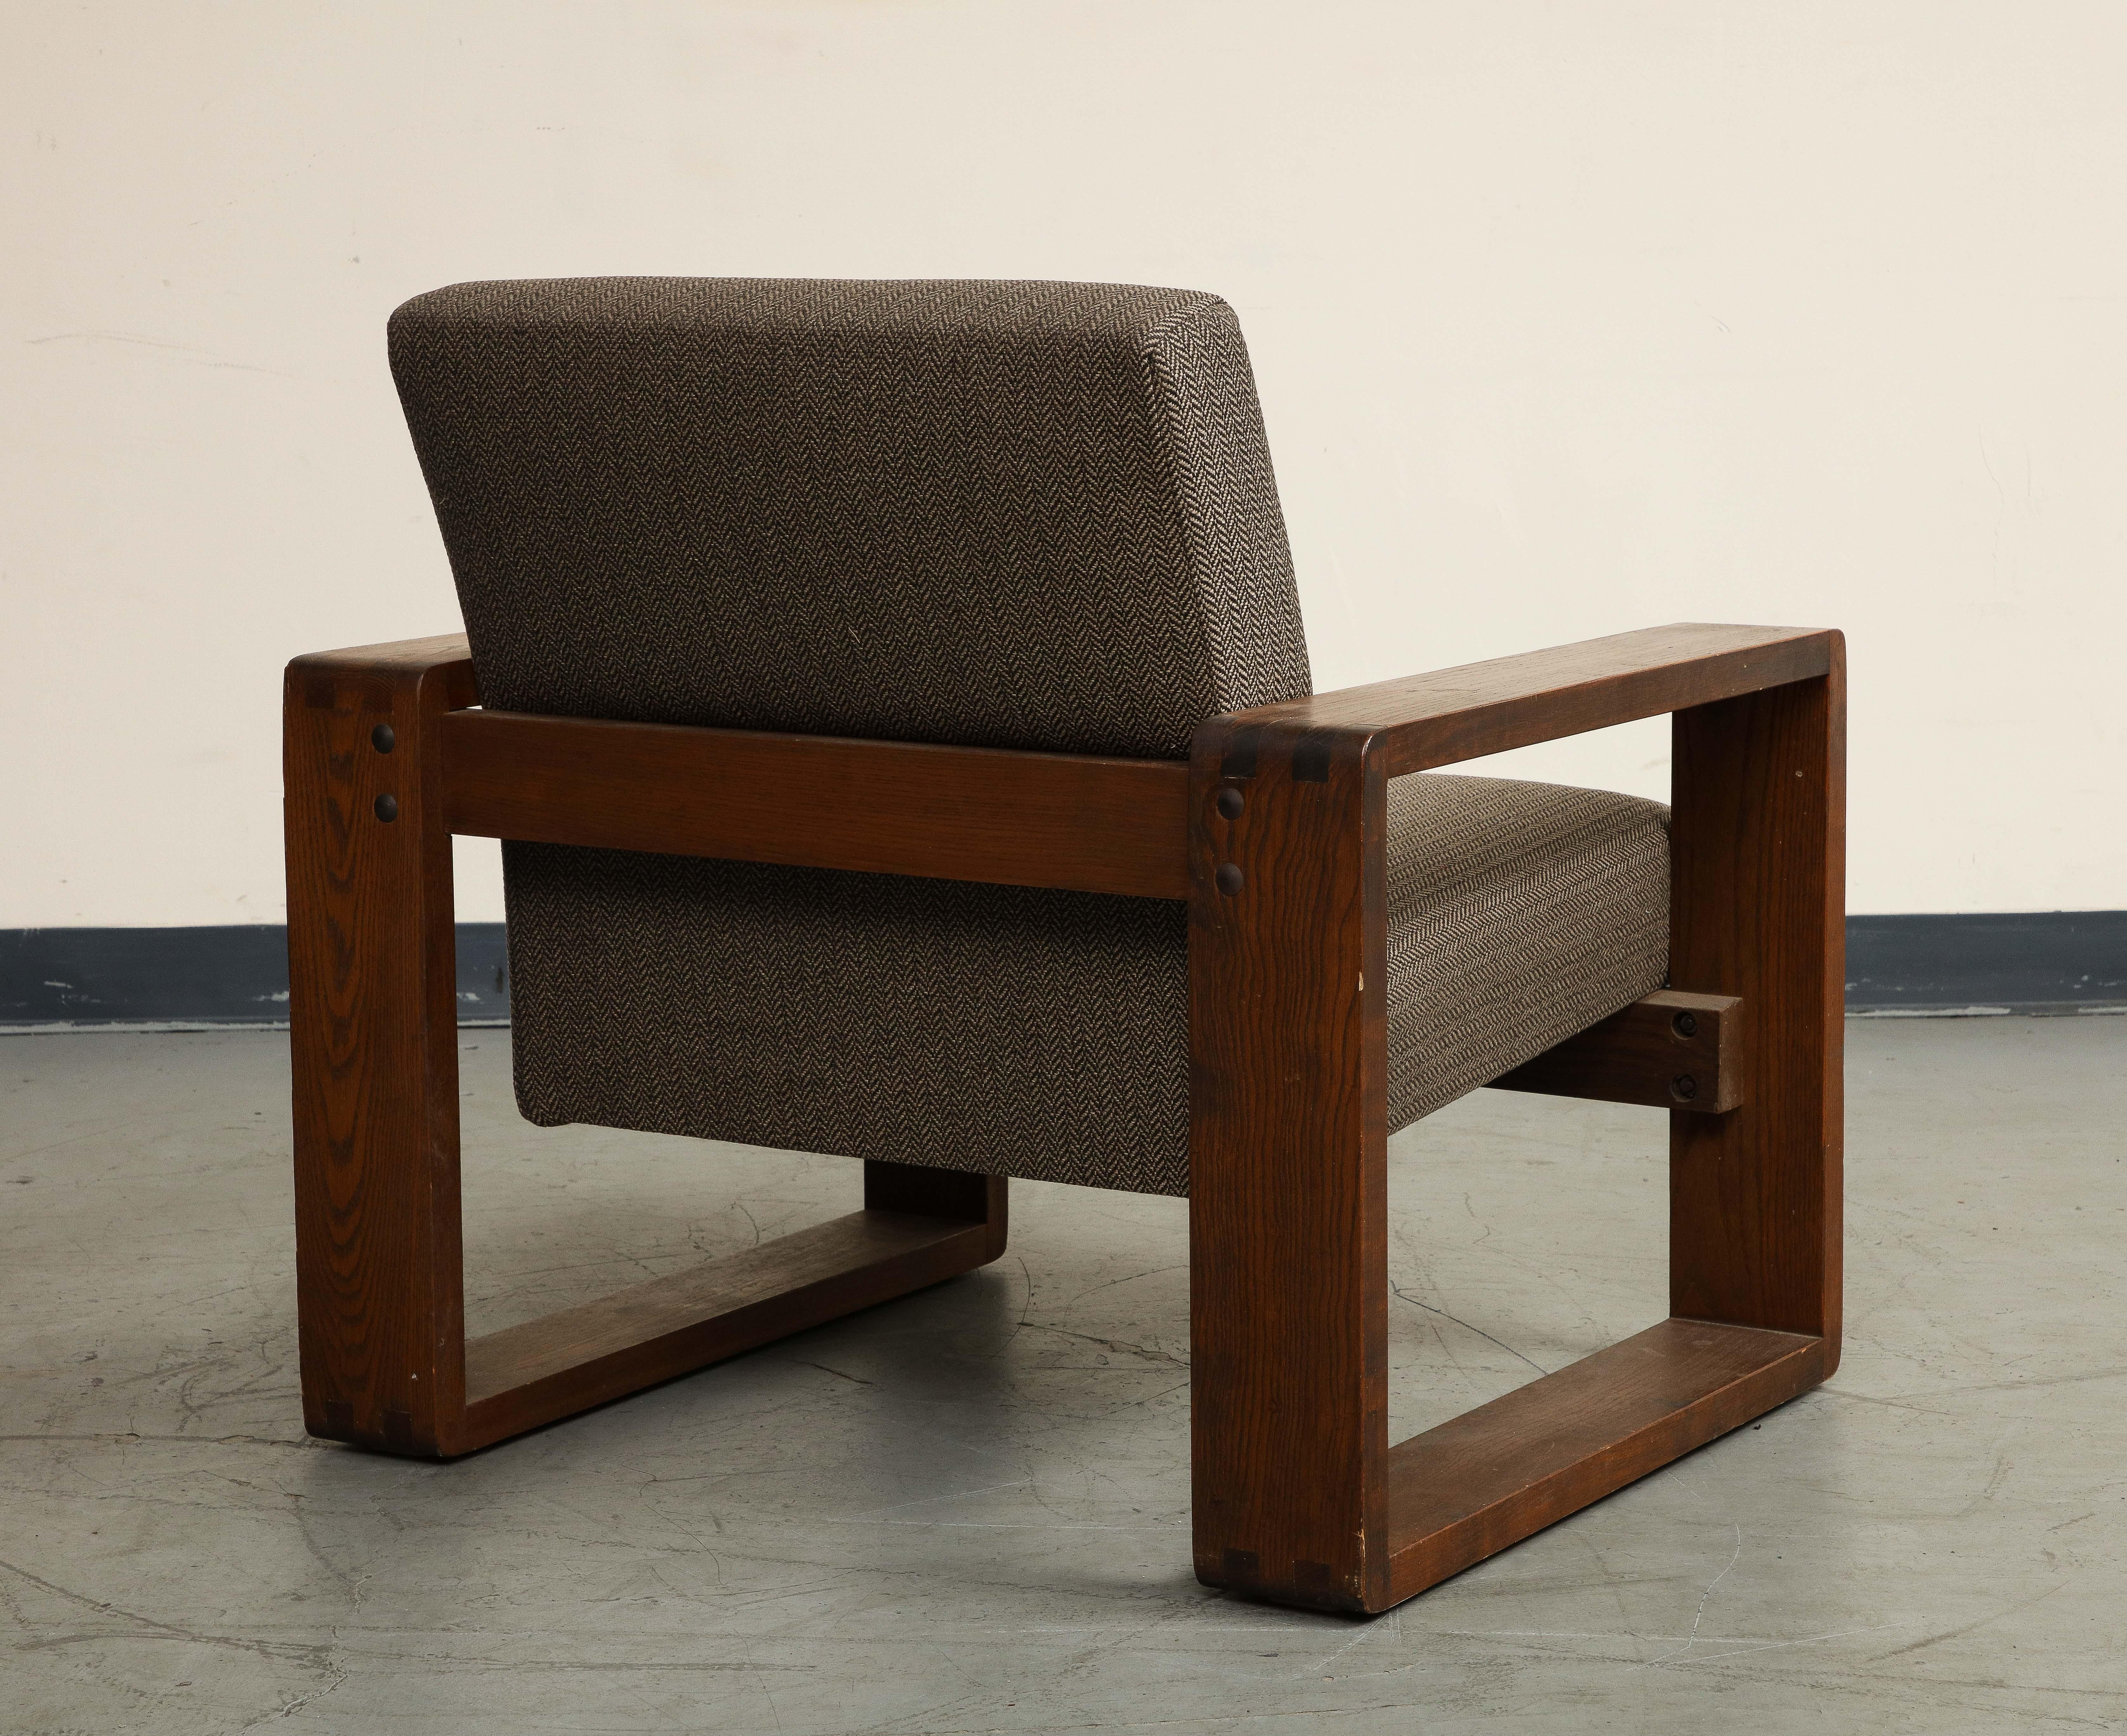 Late 20th Century Oak Lounge Chair by Hans Krieks with Herringbone Upholstery, circa 1970s For Sale